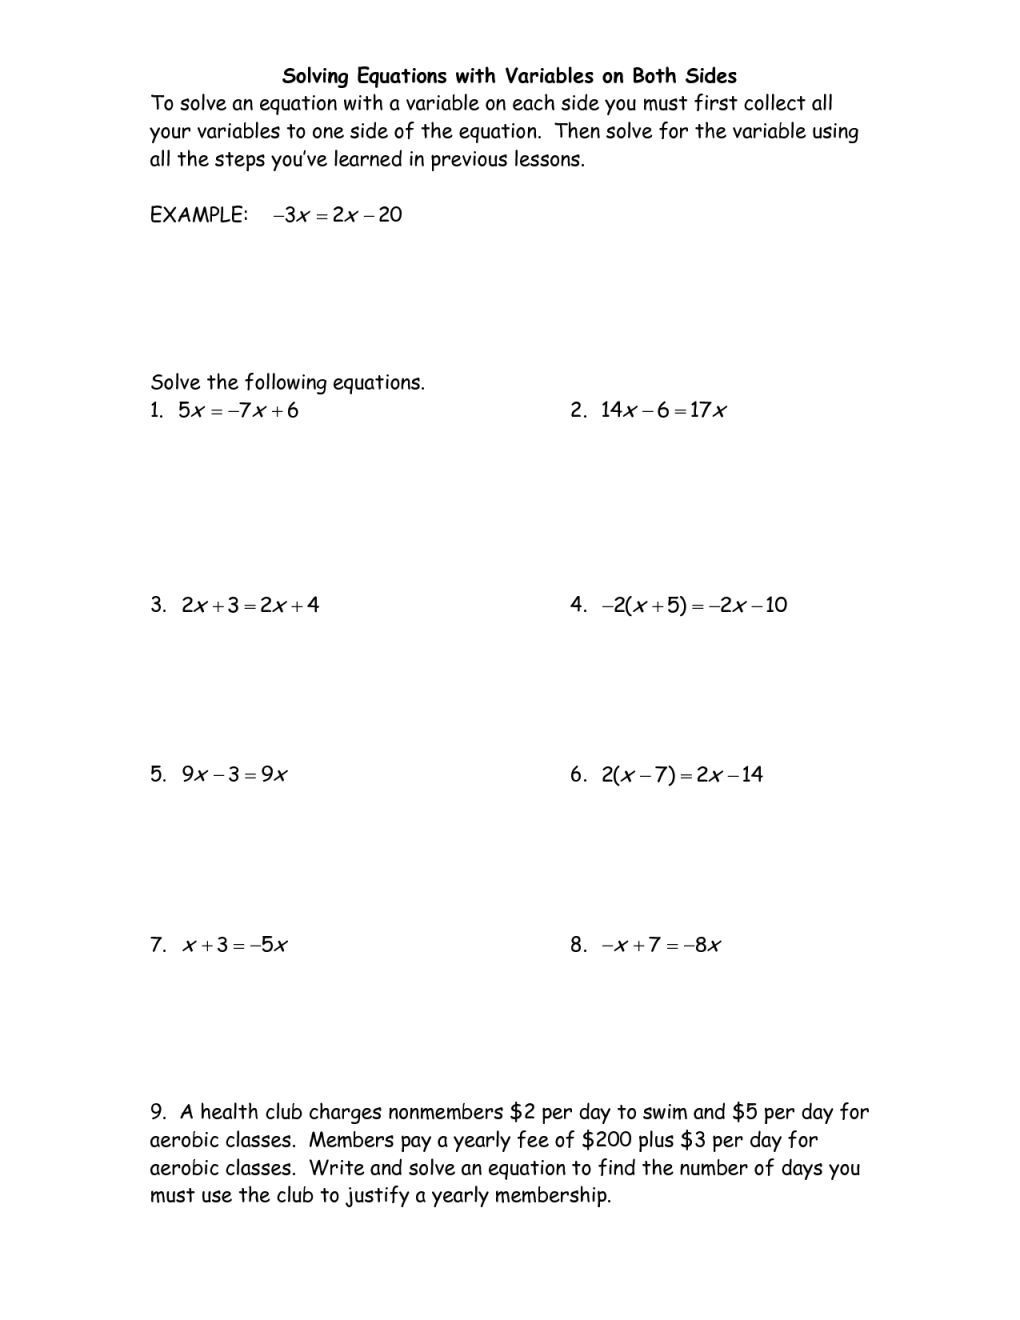 solving-equations-with-variables-on-both-sides-worksheet-8th-grade-db-excel